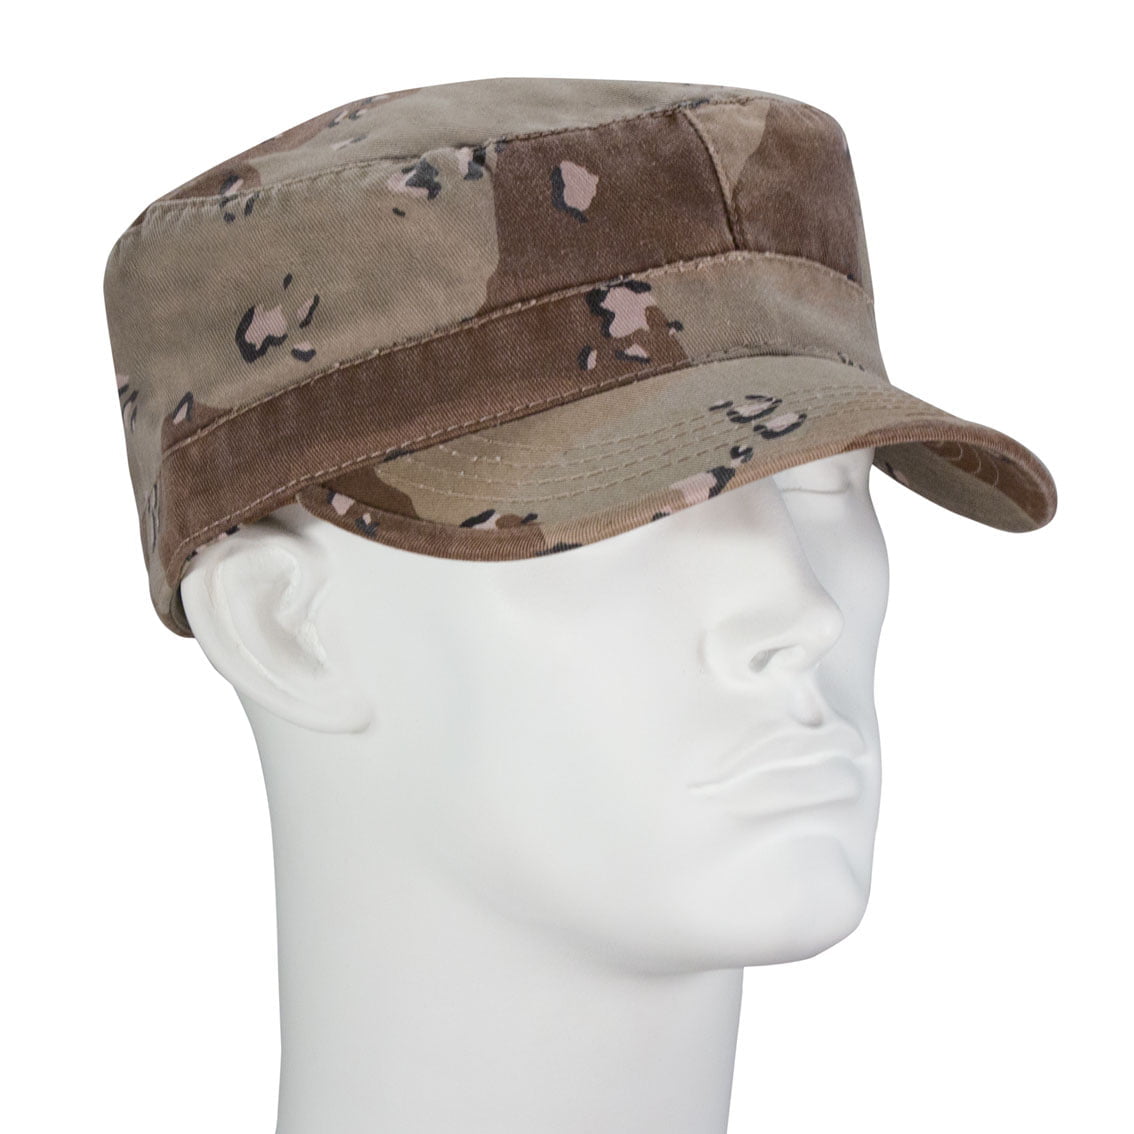 1pc Desert Camo Castro Military Fatigue Army Hat - Fitted - Unconstructed - 100% Cotton